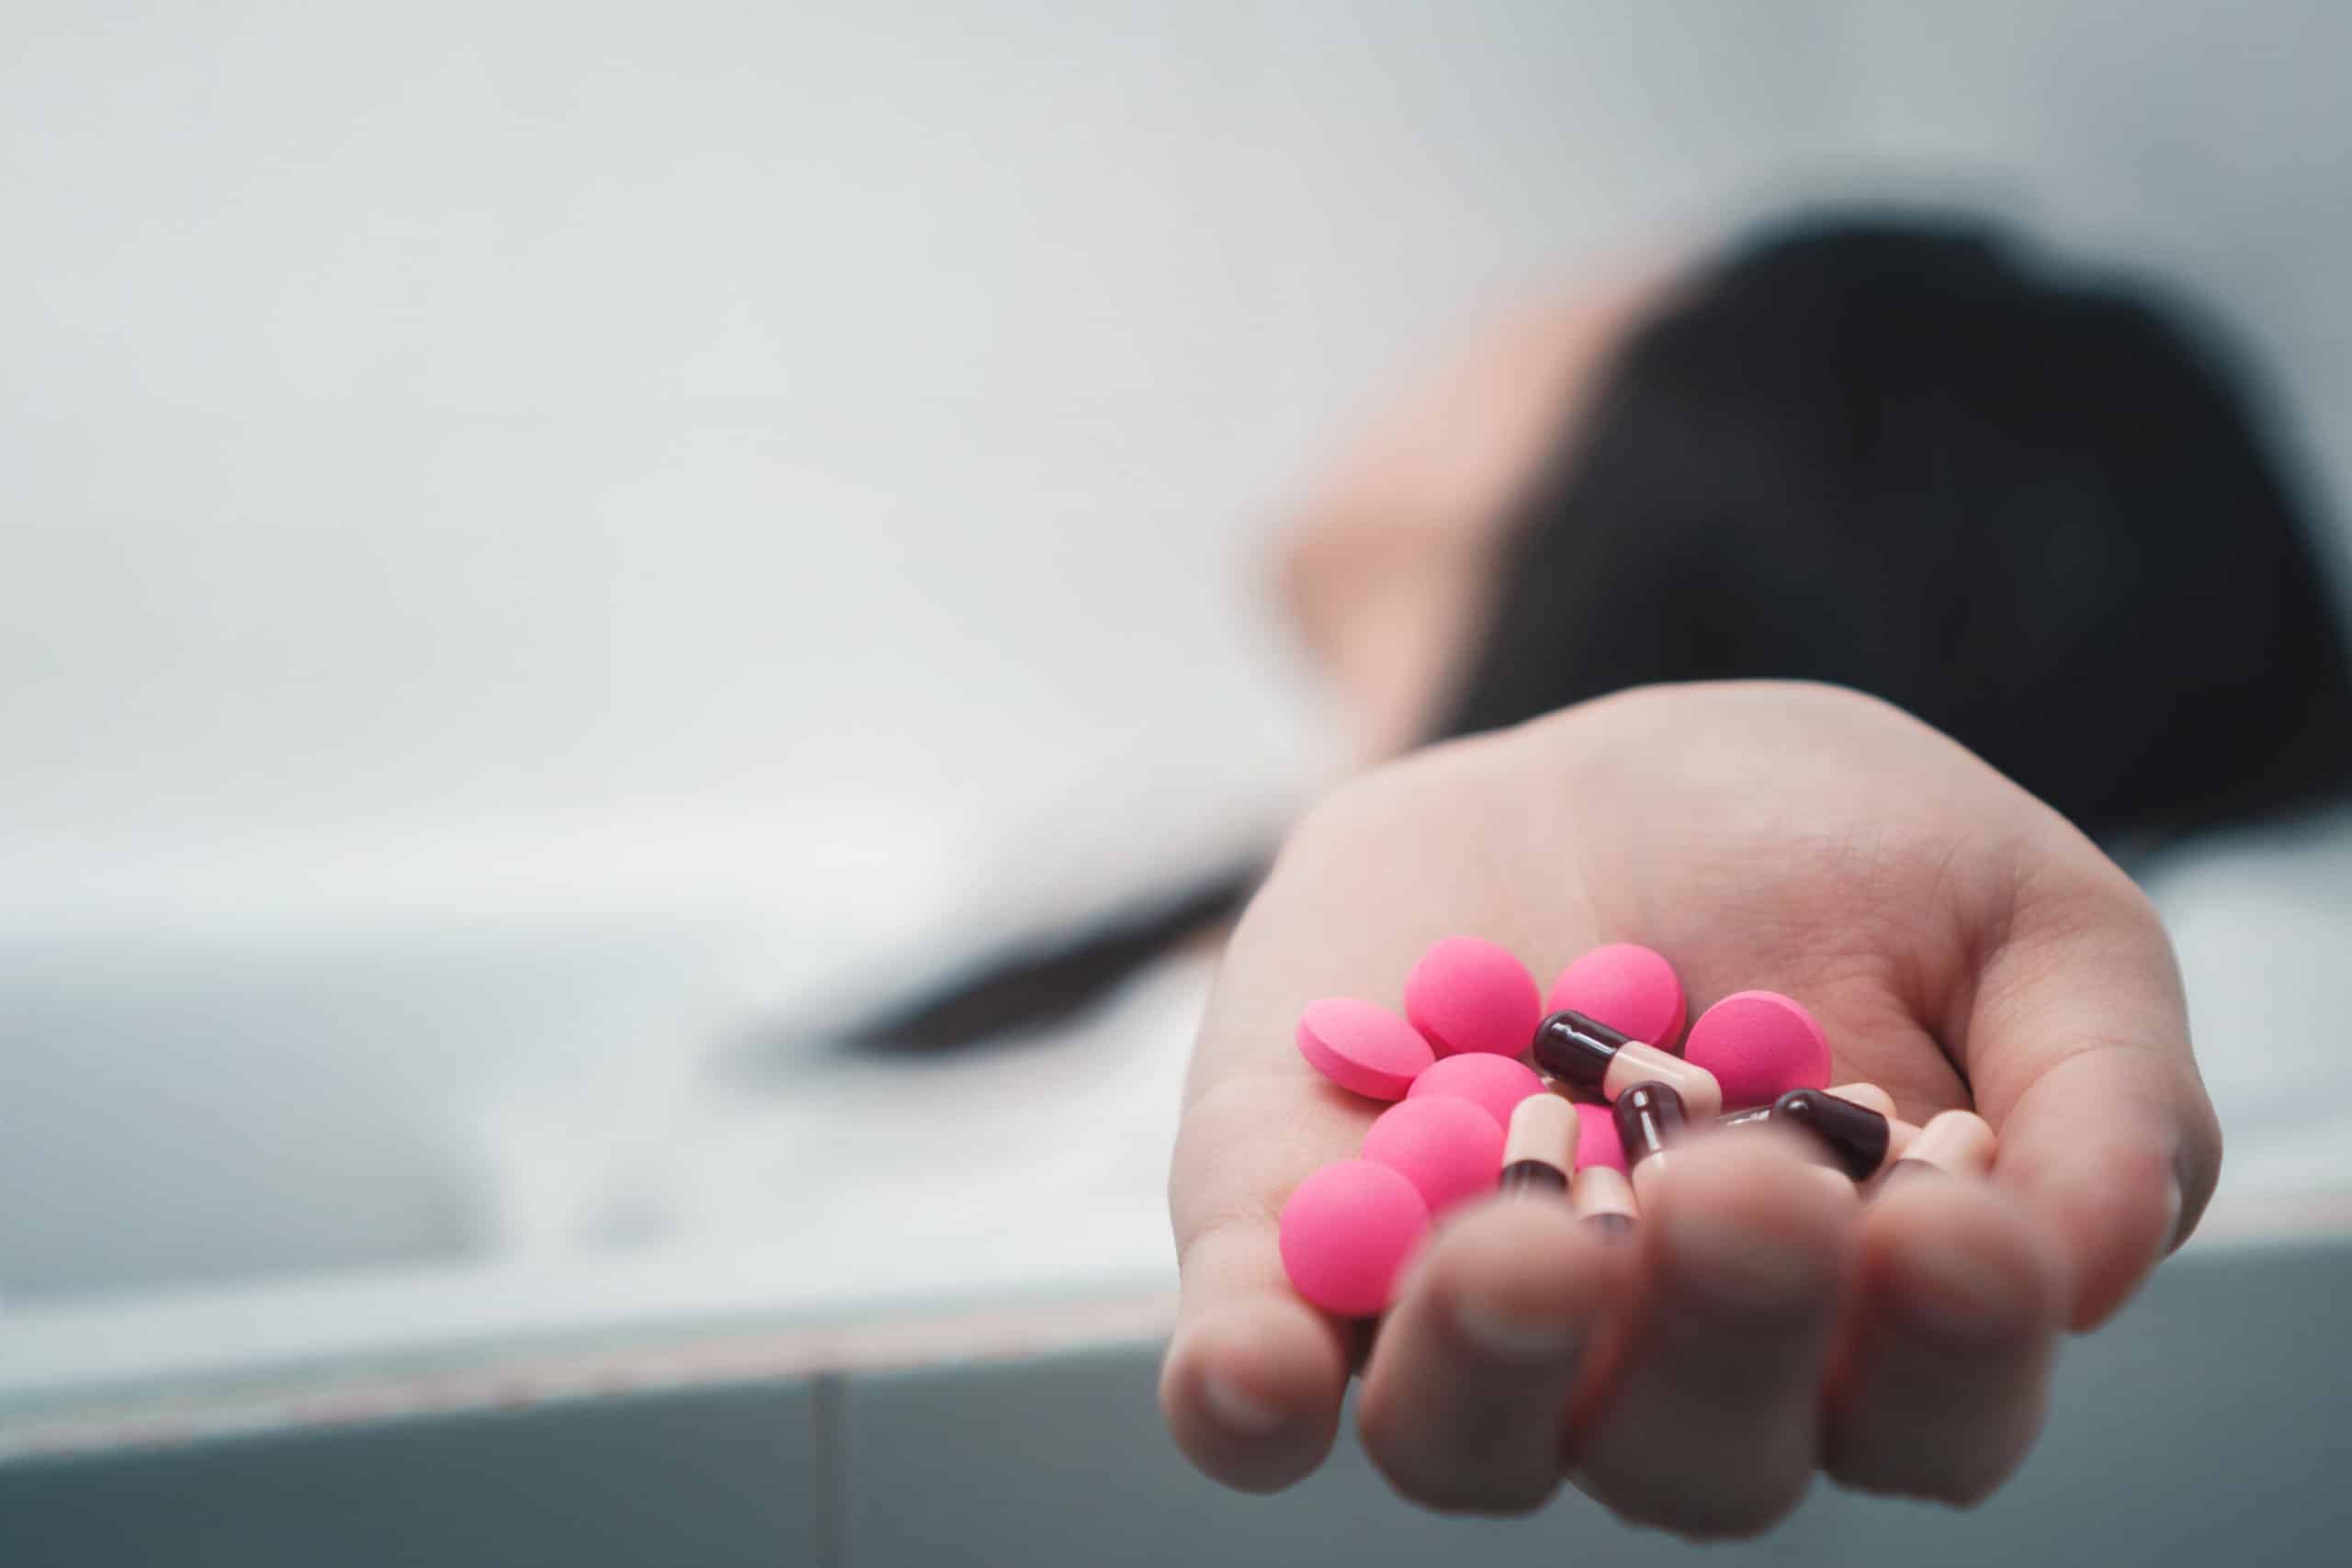 How Long Does It Take to Detox from Xanax?